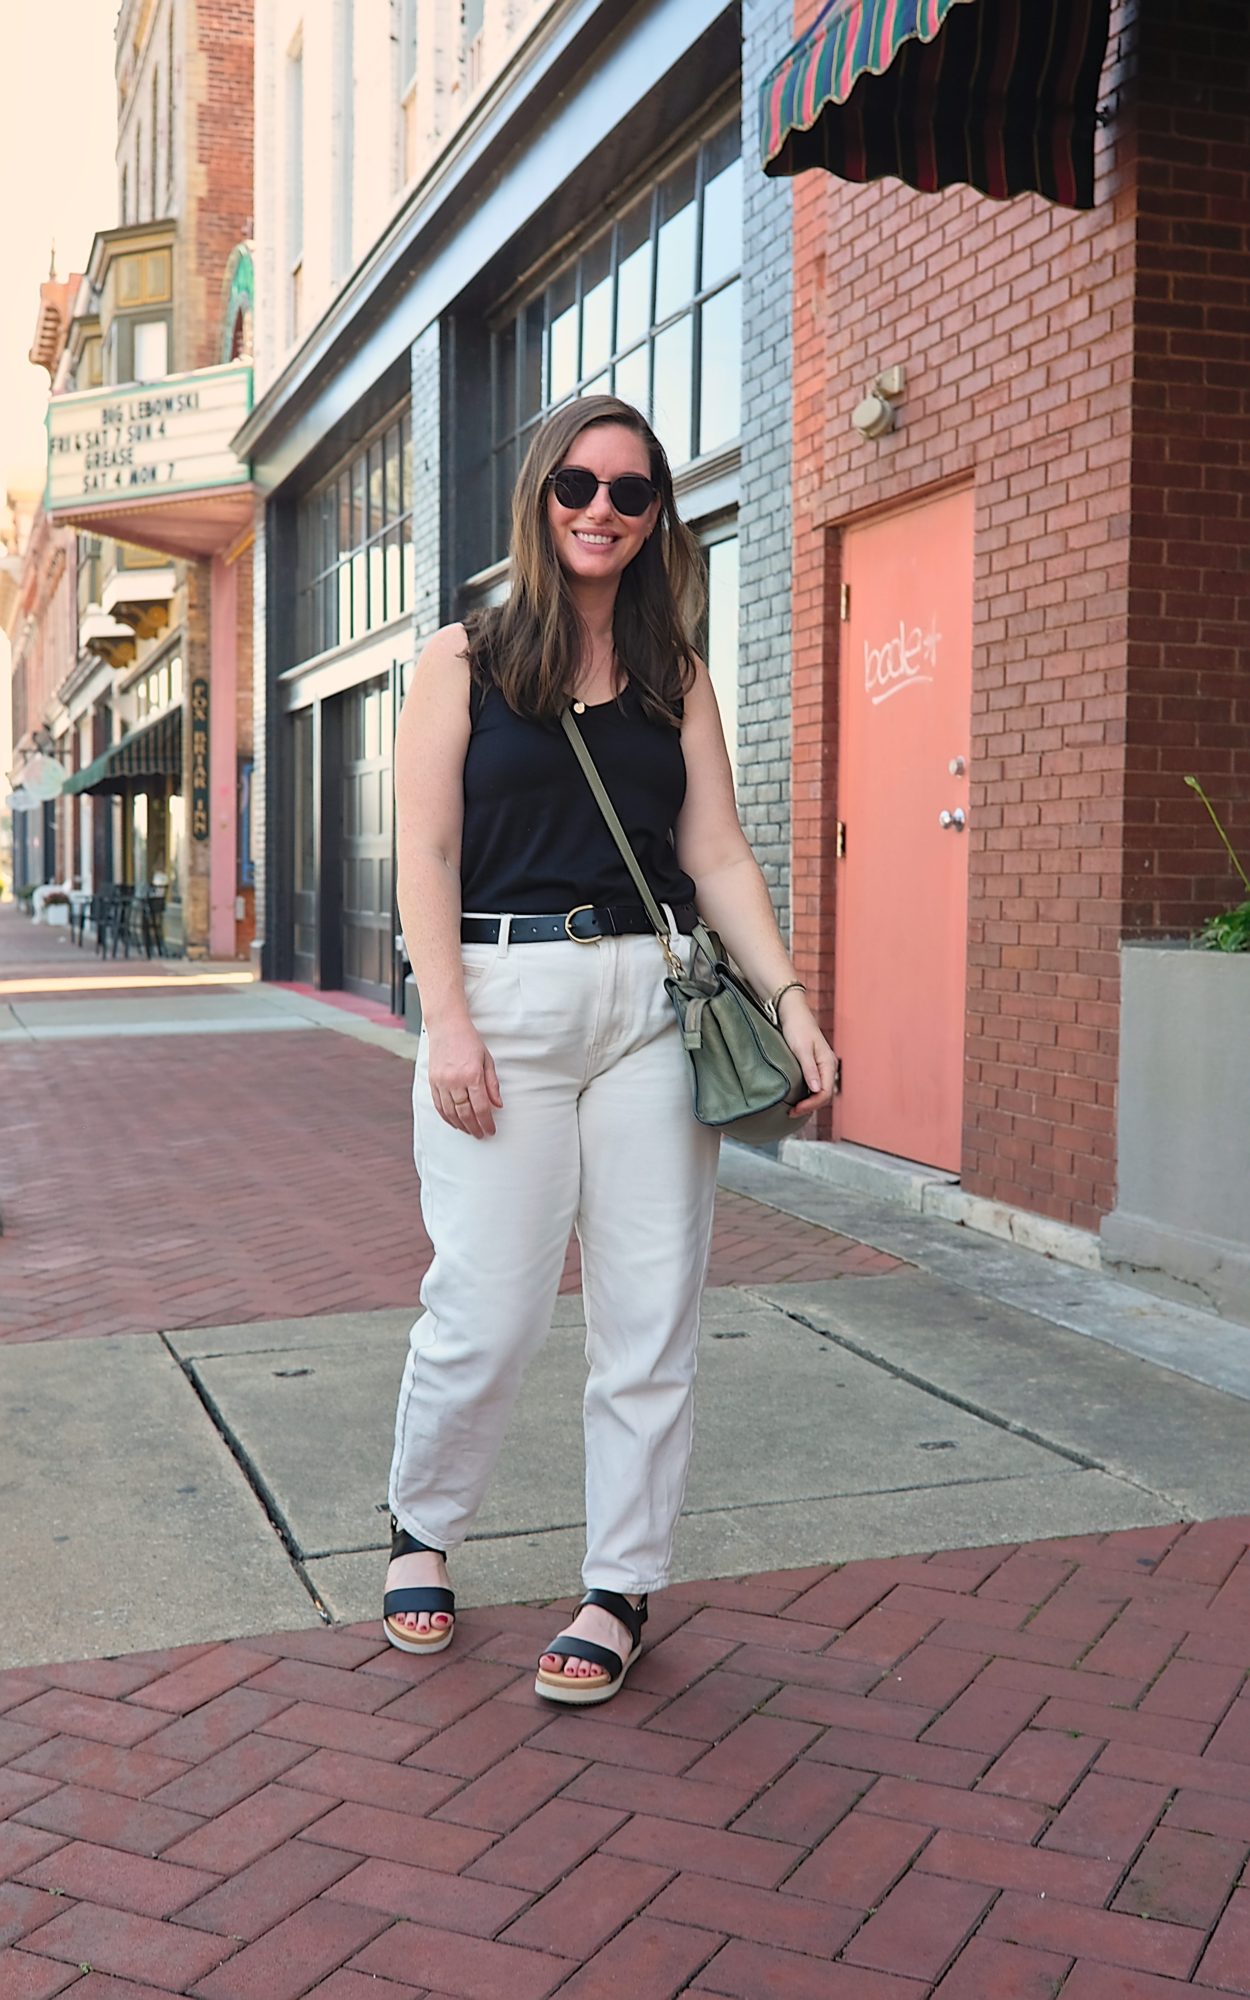 Alyssa wears a black tank with white denim and sandals in Paducah